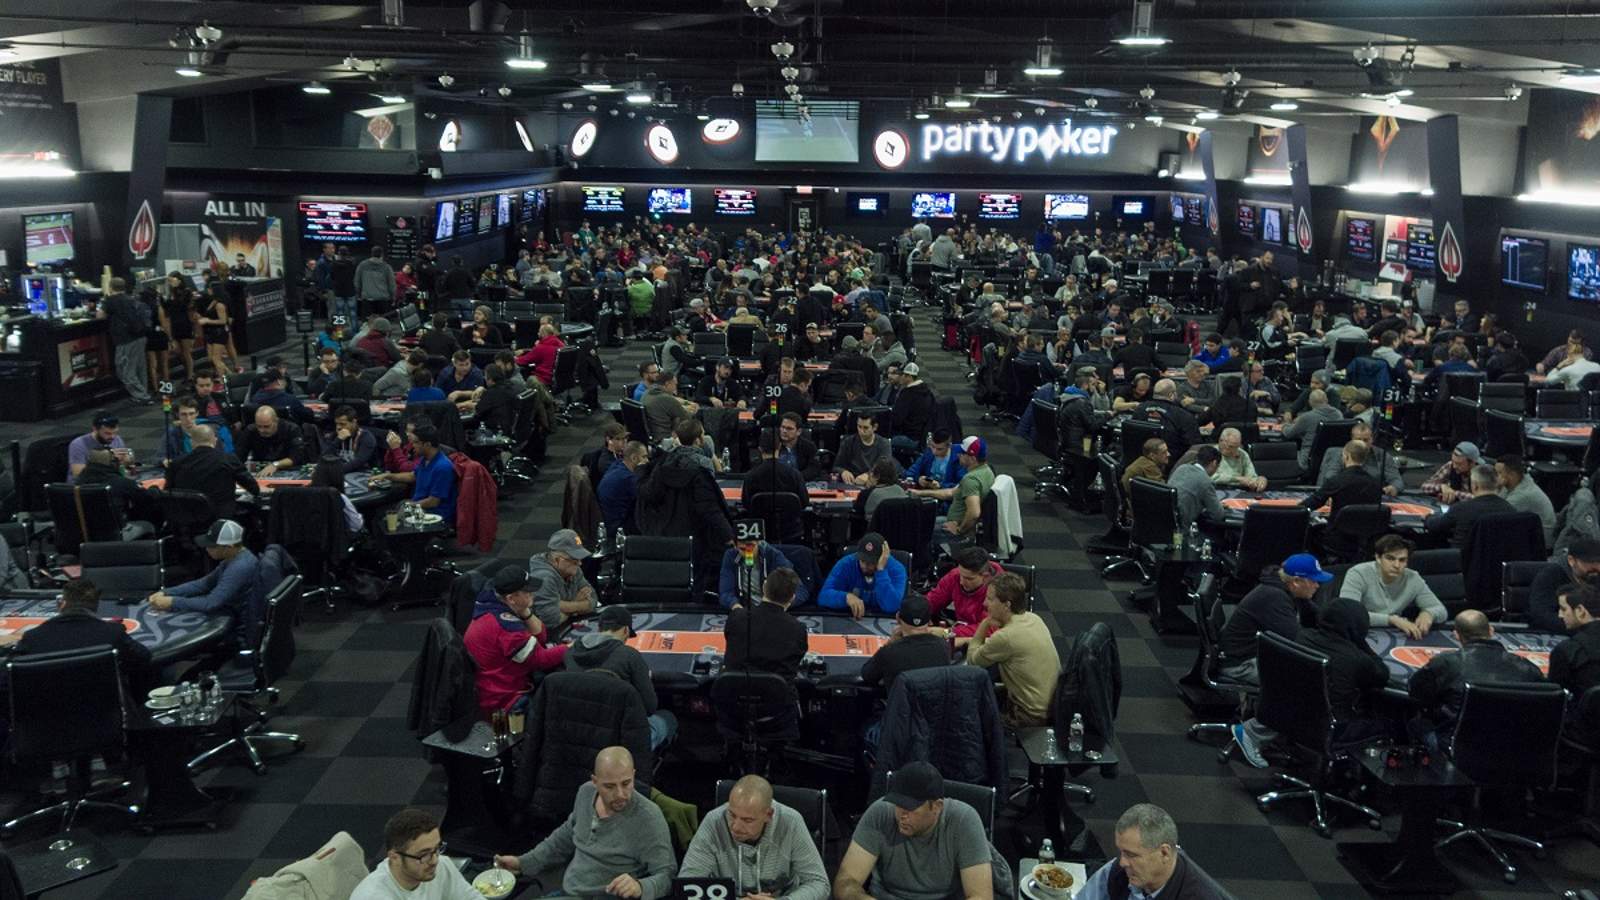 Playground Poker Features Re-entries for WPT Main Event